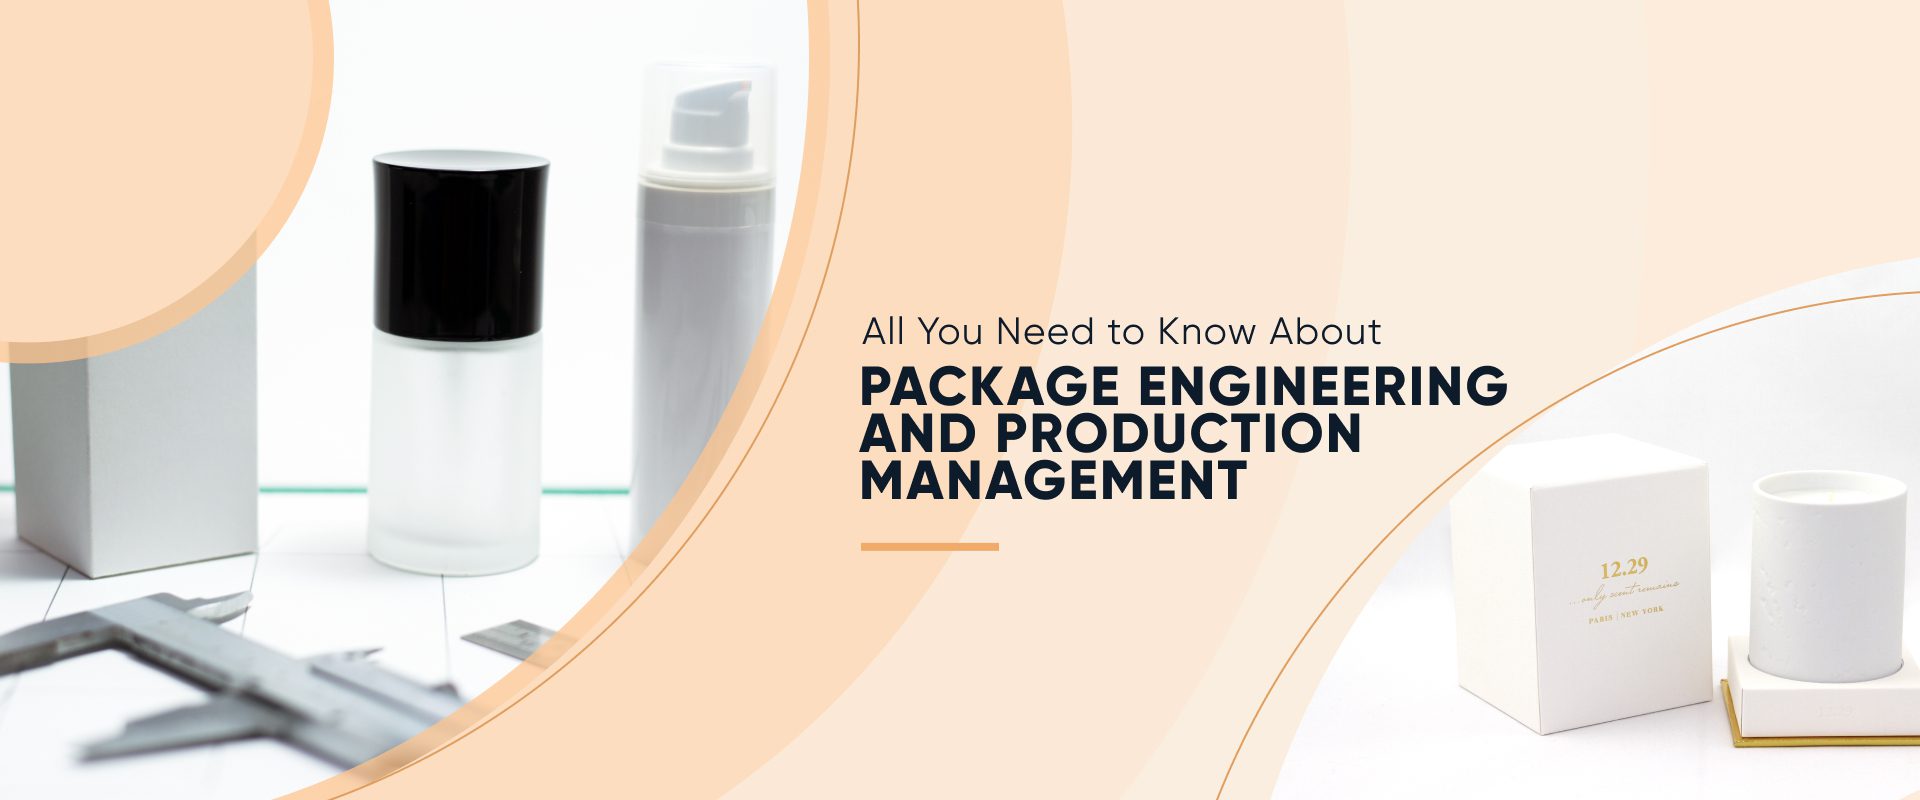 All You Need to Know About Packaging Engineers